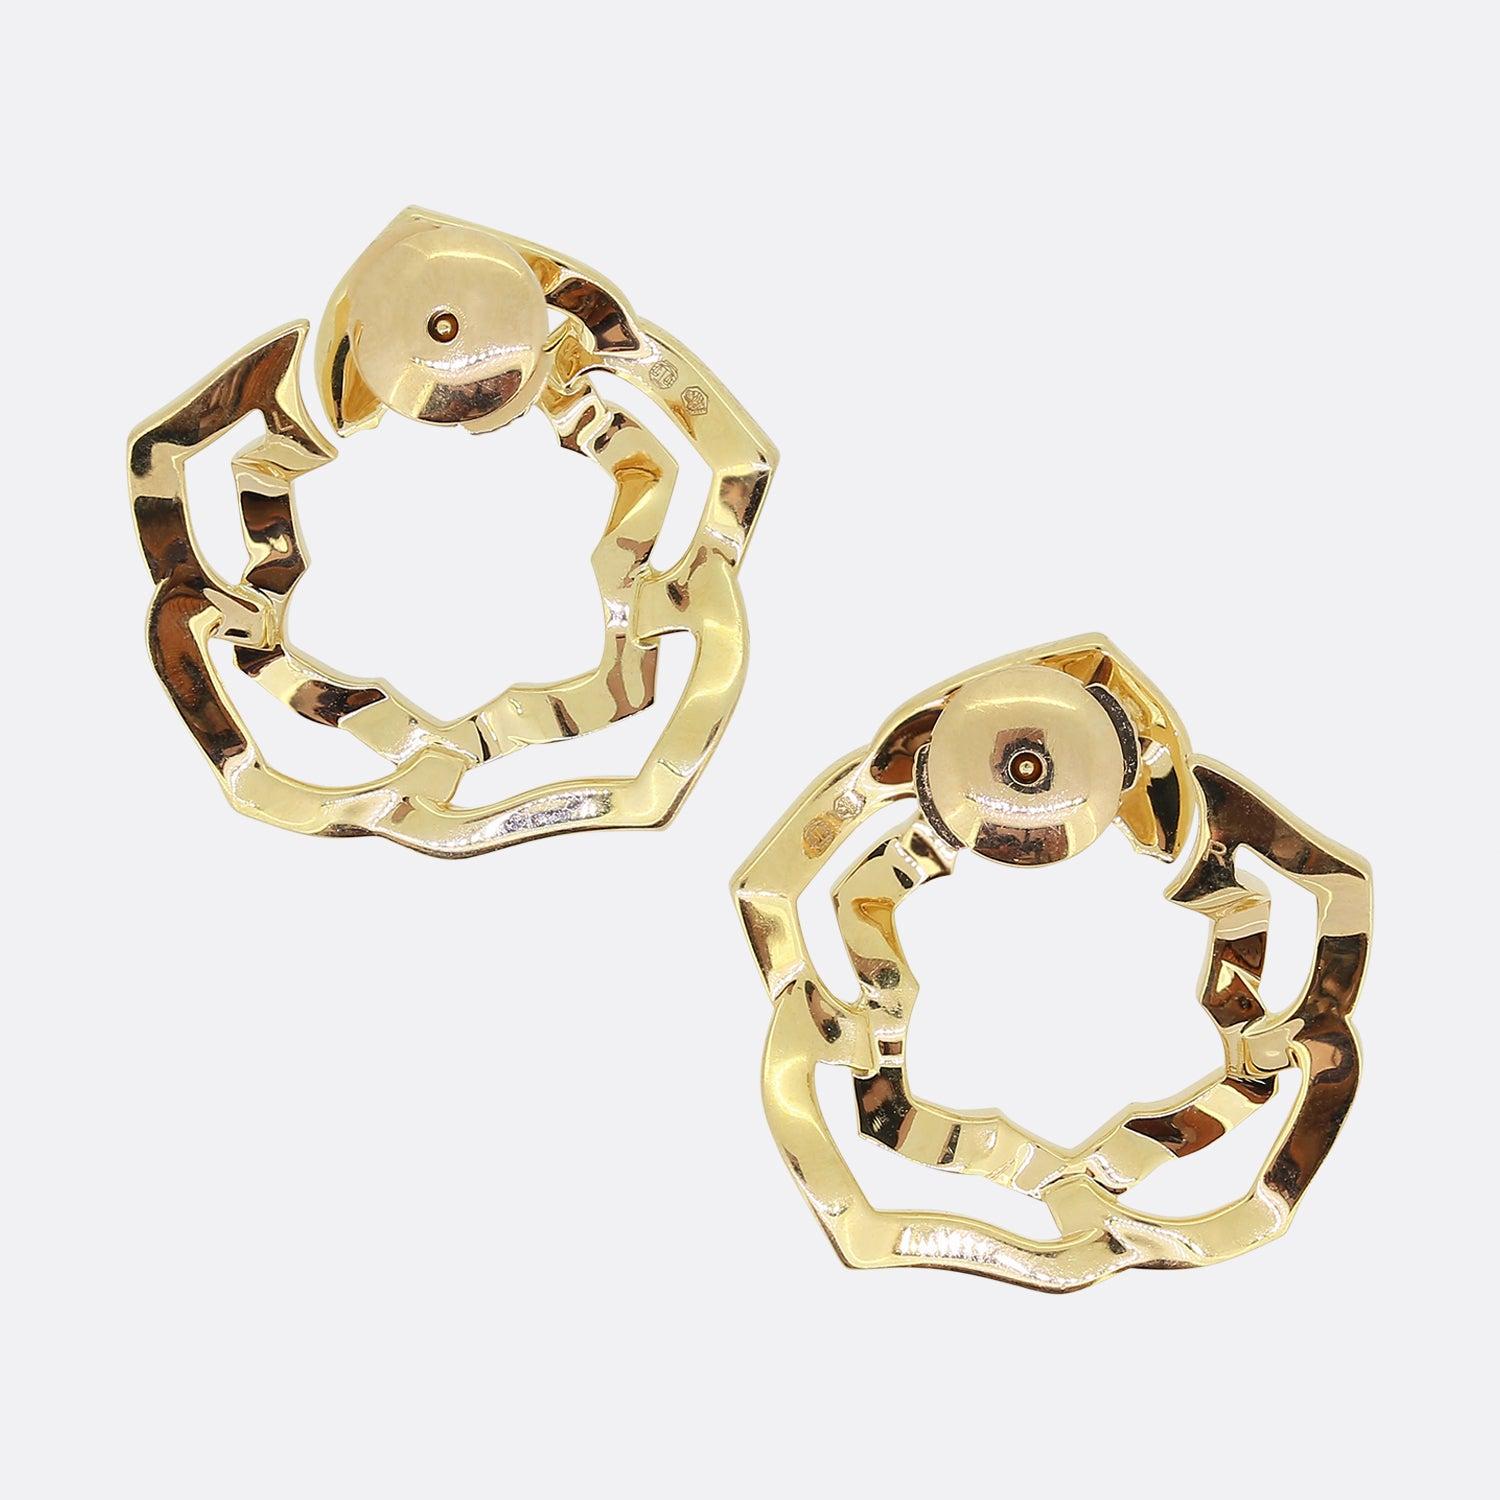 This is a fabulous semi-abstract pair of diamond earrings from the world renowned luxury jewellery brand, Piaget. Each piece has been rendered in warm 18ct rose gold to form the shape of a rose flower head; the inside open frame of which has then